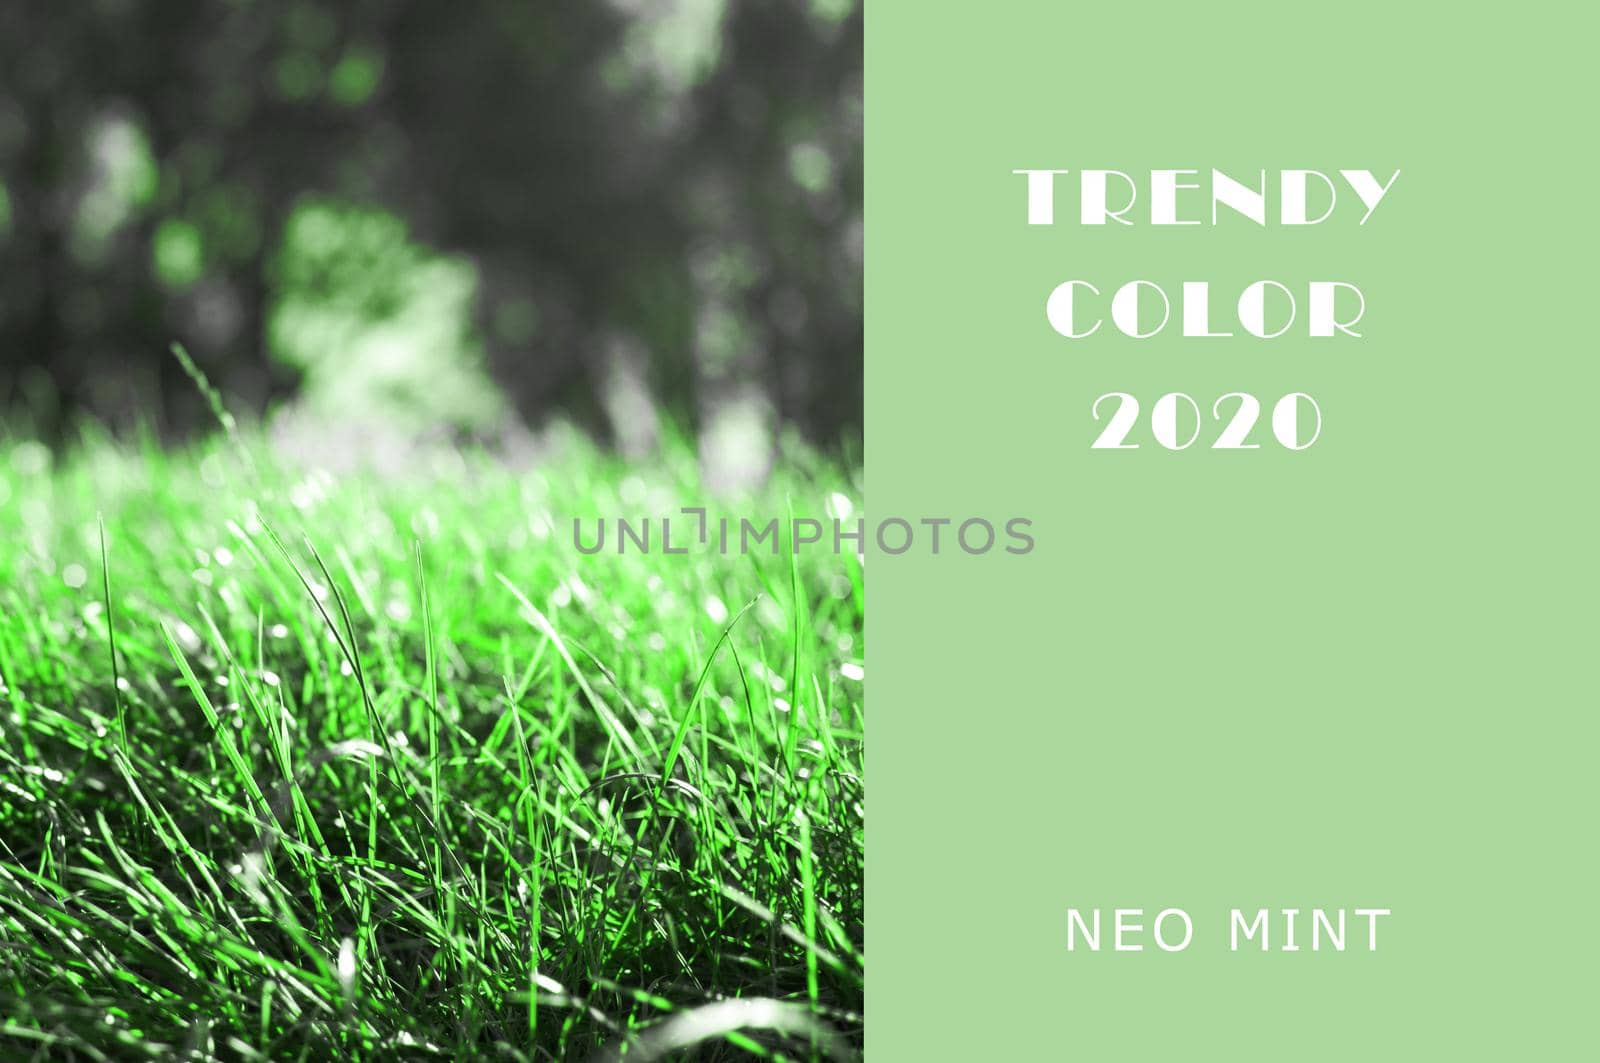 Neo Mint grassy lawn. Juicy tones in a new mint color. Abstract light green background with vibrant colors. Copy space layout for design. by Alla_Morozova93